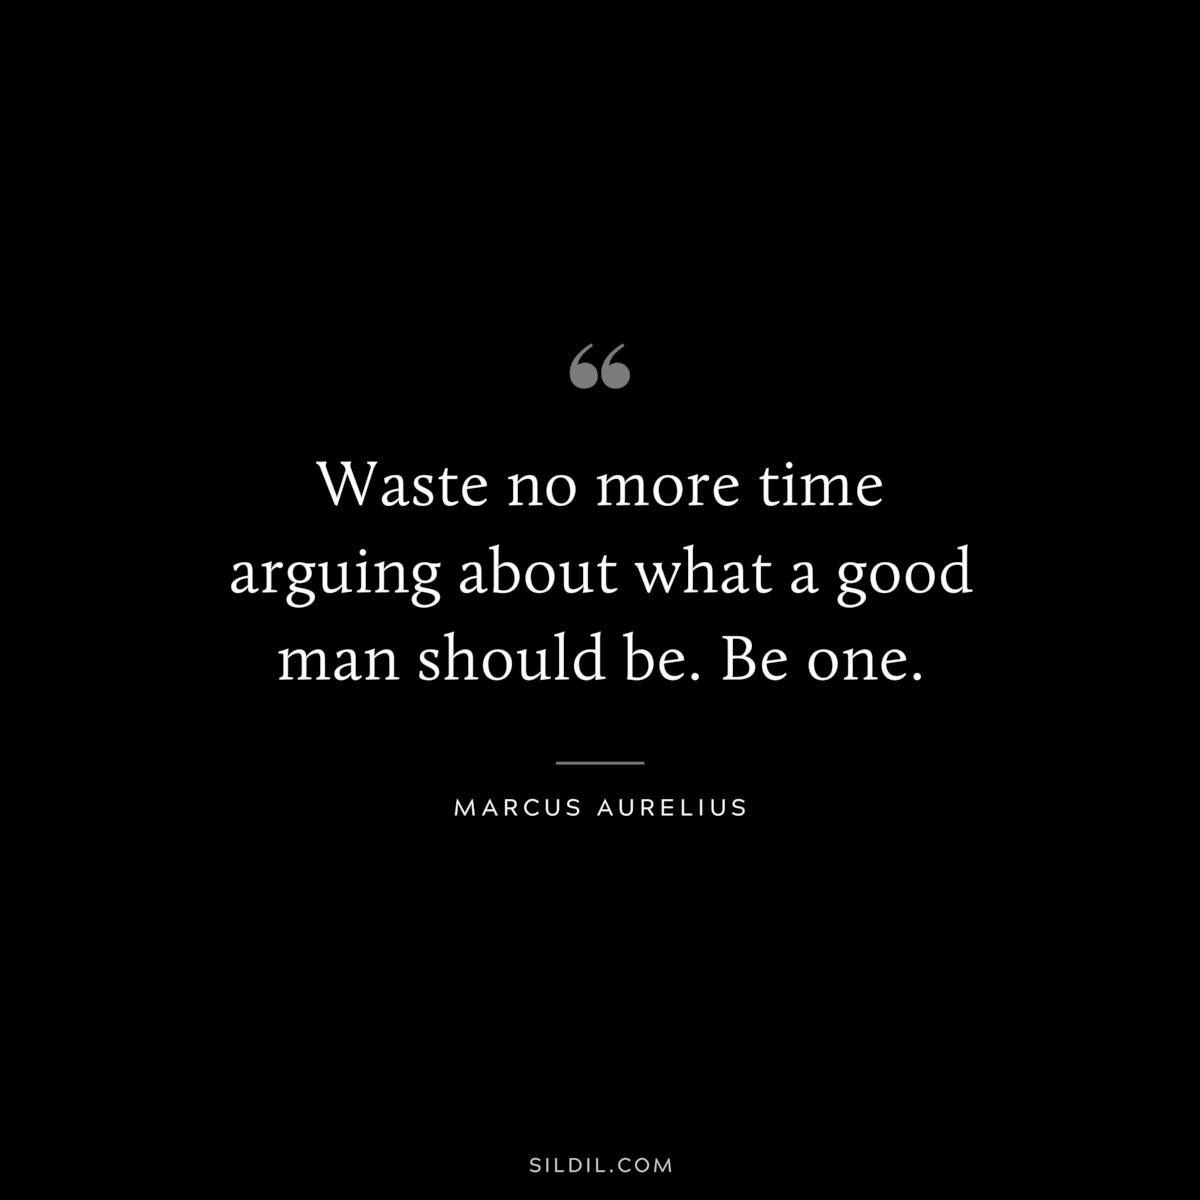 Waste no more time arguing about what a good man should be. Be one. ― Marcus Aurelius